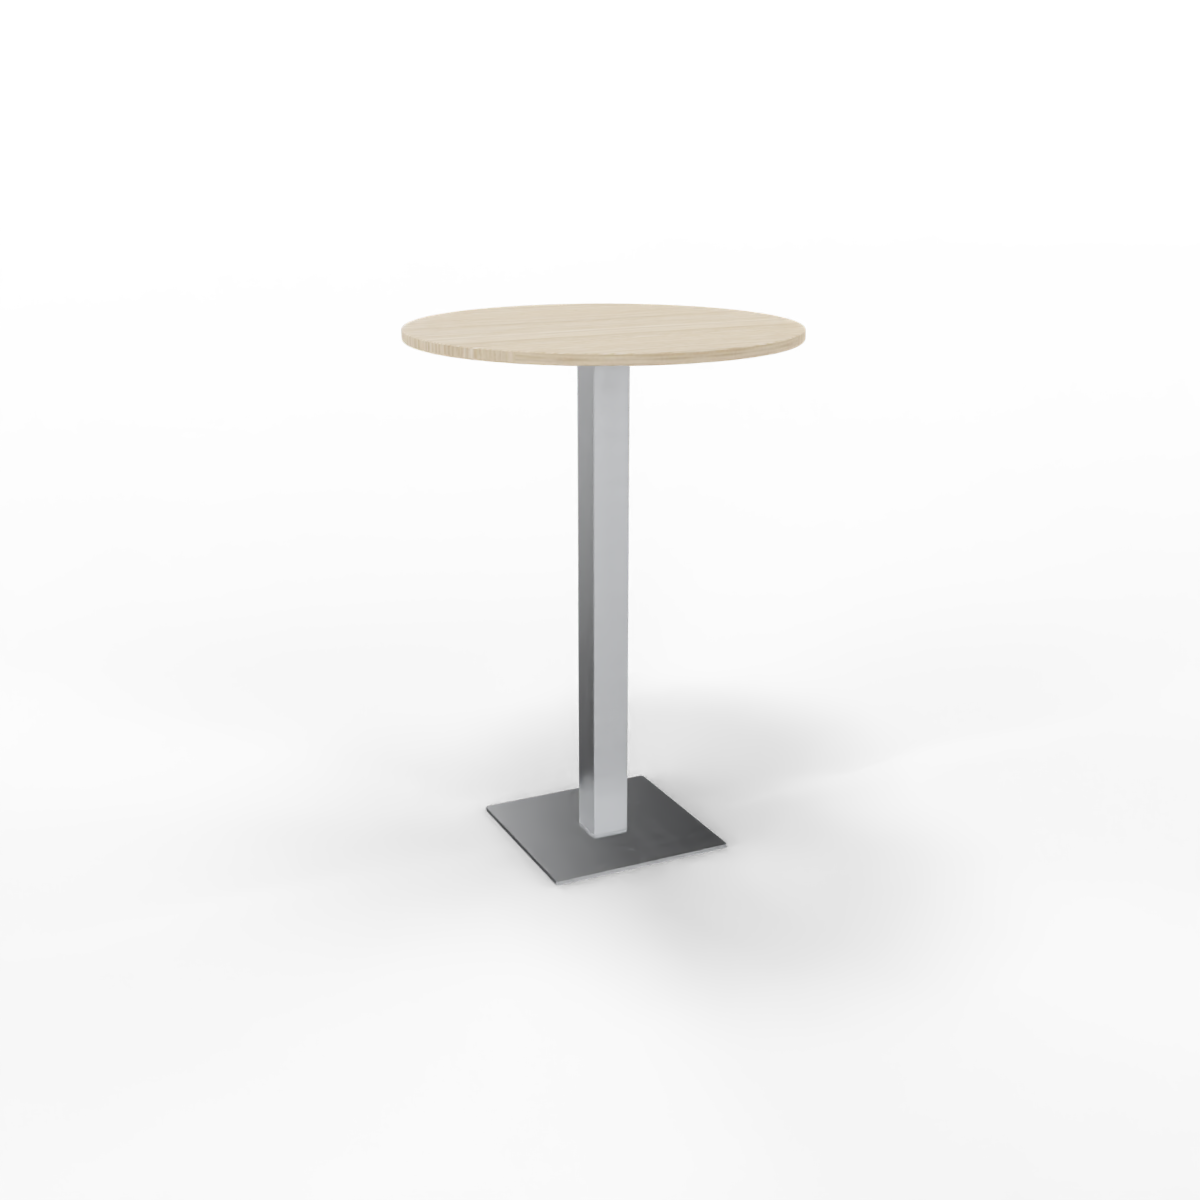 Basic round standing table